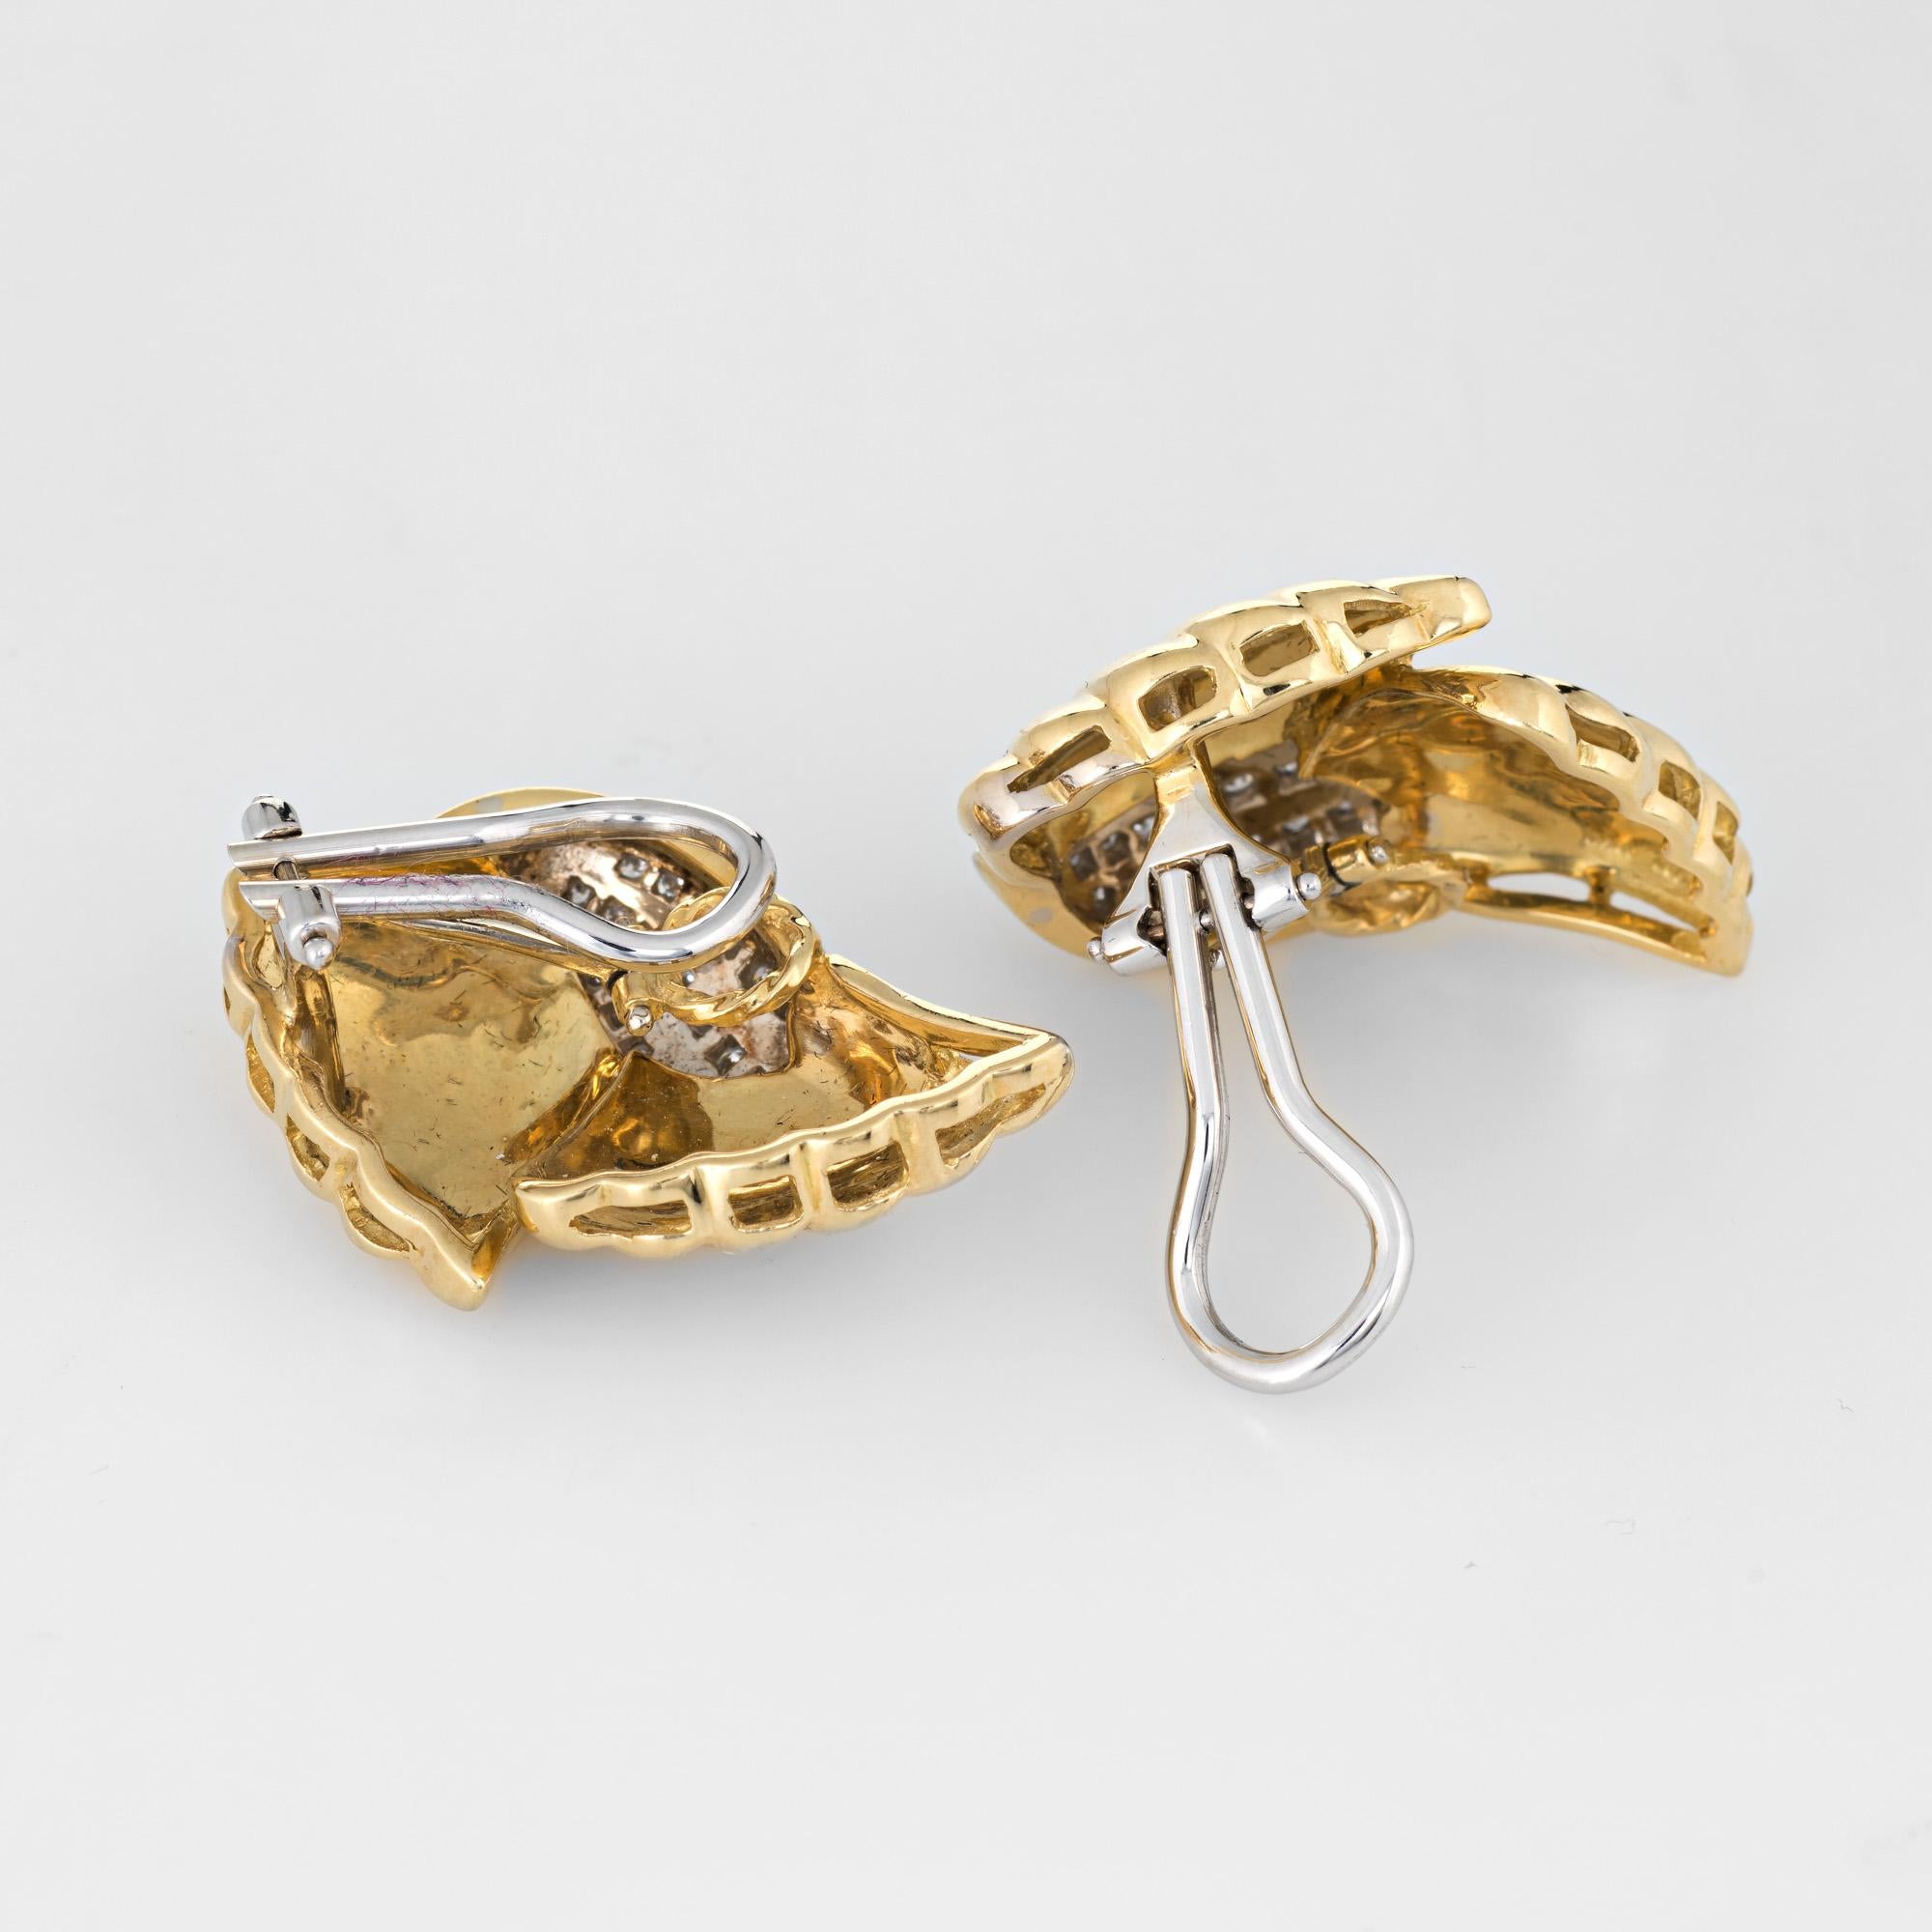 Stylish vintage diamond cocktail earrings crafted in 18 karat yellow gold (circa 1980s). 

44 round brilliant cut diamonds total an estimated 0.60 carats (estimated at H-I color and VS2-SI1 clarity).

The earrings are large in scale and make a great